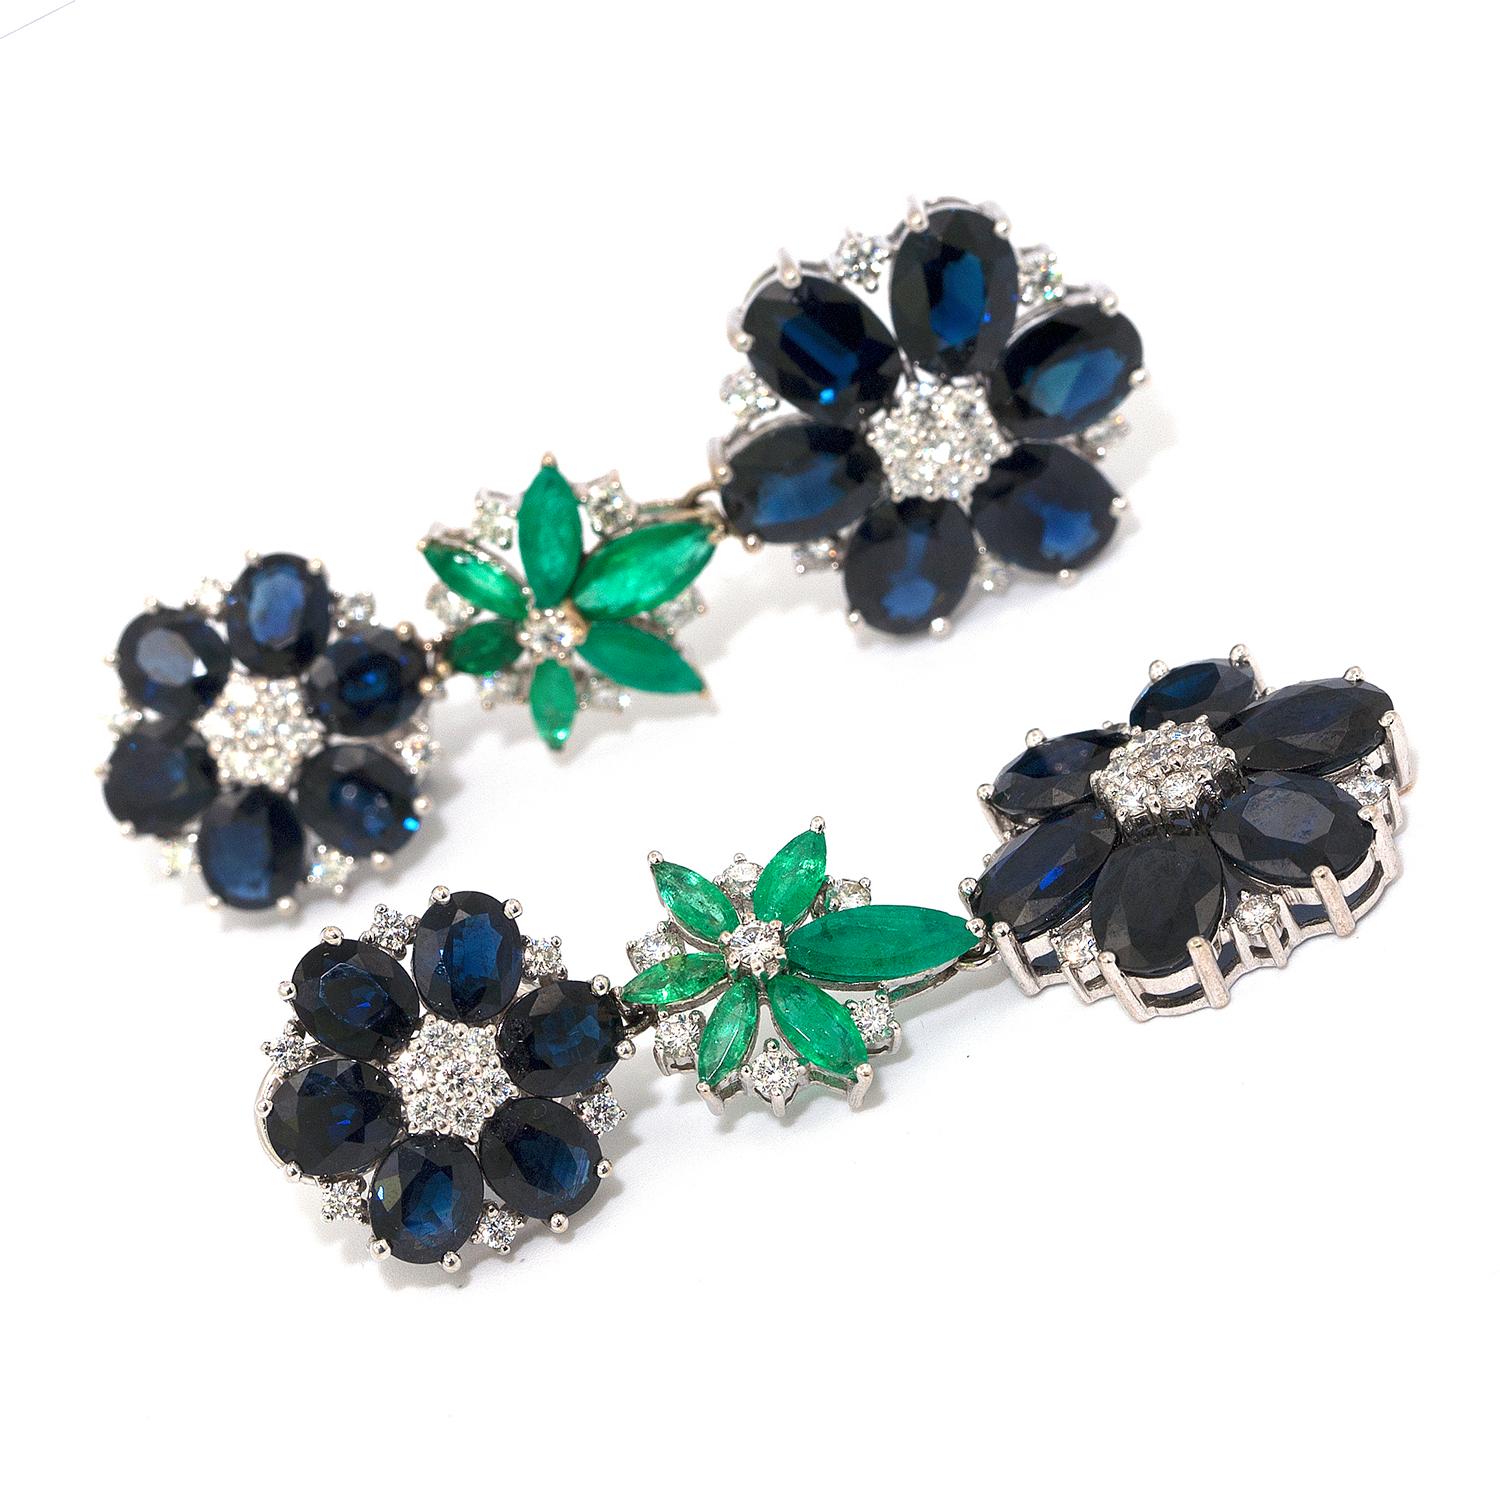 Classic drop, sapphire, emerald and diamond floral design, estate earrings. The 28.79 cts of Australian colored, oval sapphires contrast beautifully with the clean white round brilliant cut diamonds (approx. 1.35cts) that compliment the 3.02 cts of